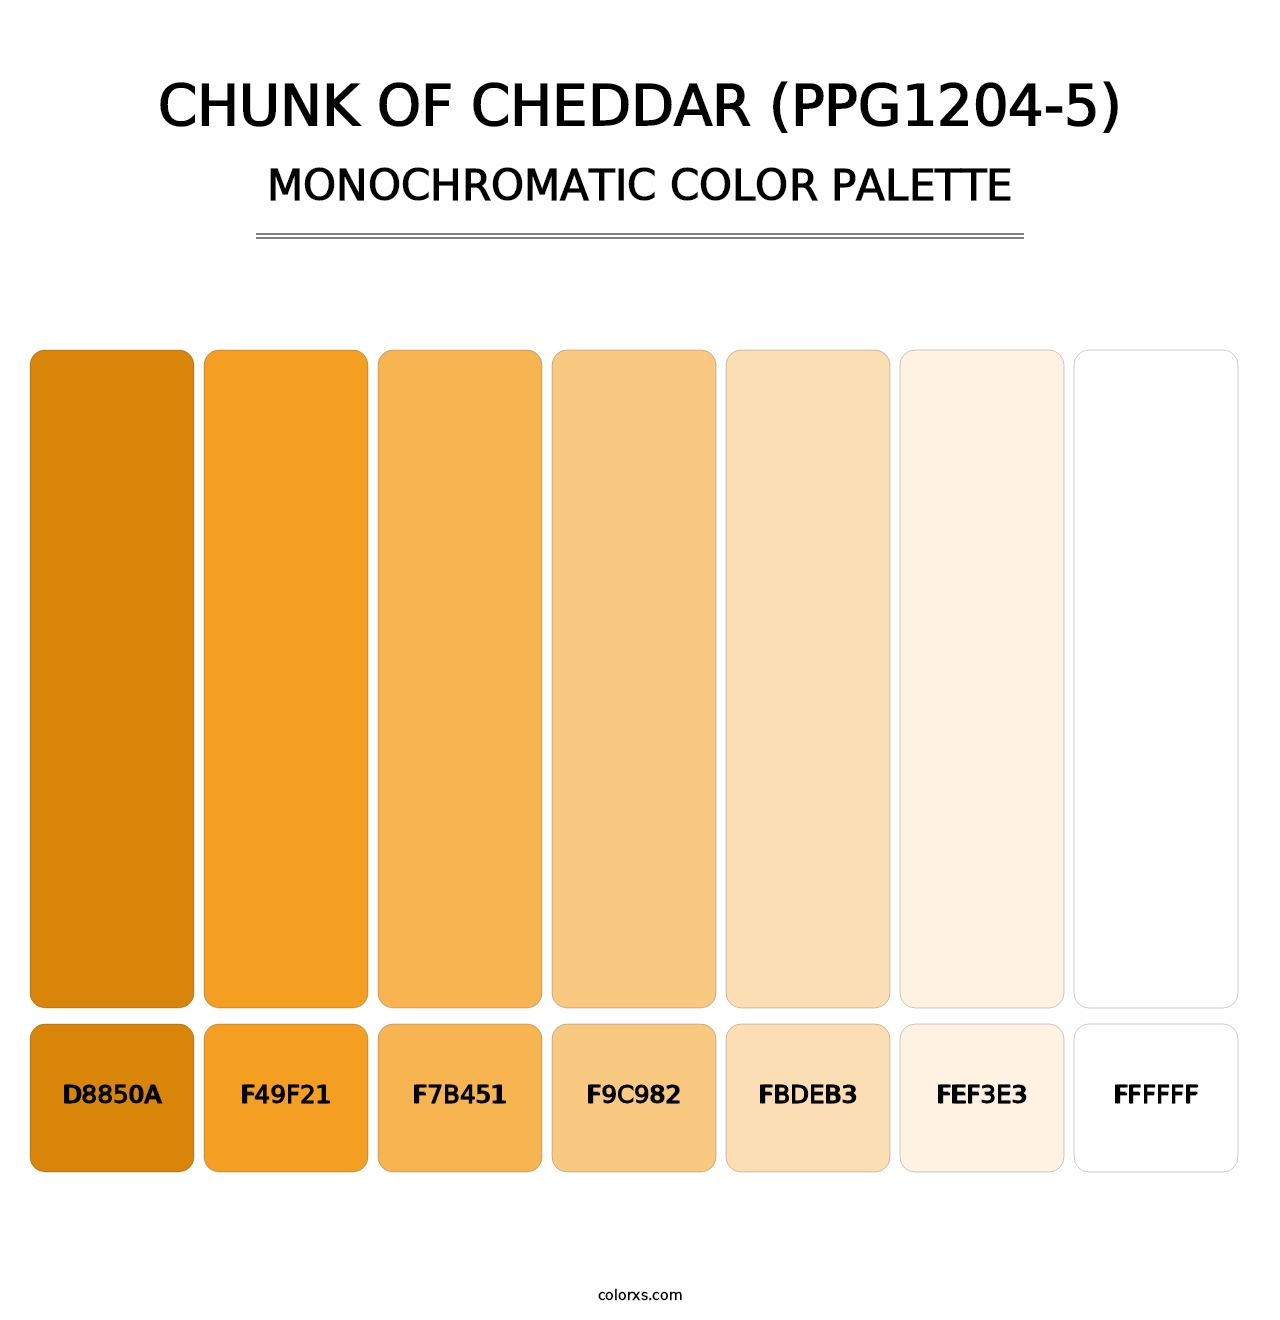 Chunk Of Cheddar (PPG1204-5) - Monochromatic Color Palette